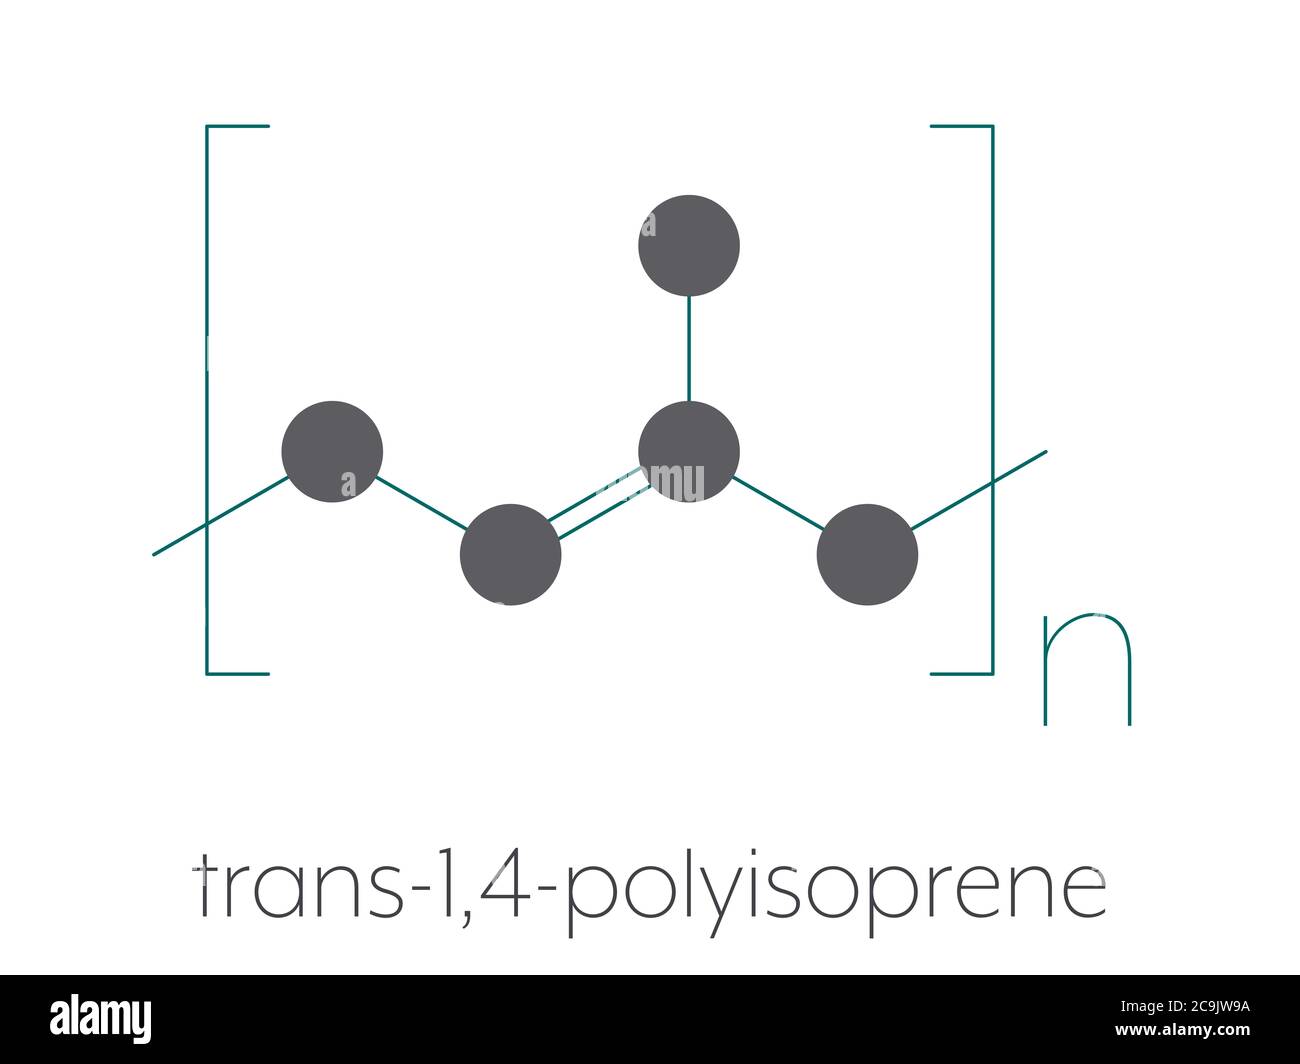 Trans-1,4-polyisoprene polymer, chemical structure. Main component of gutta-percha. Stylized skeletal formula: Atoms are shown as color-coded circles Stock Photo